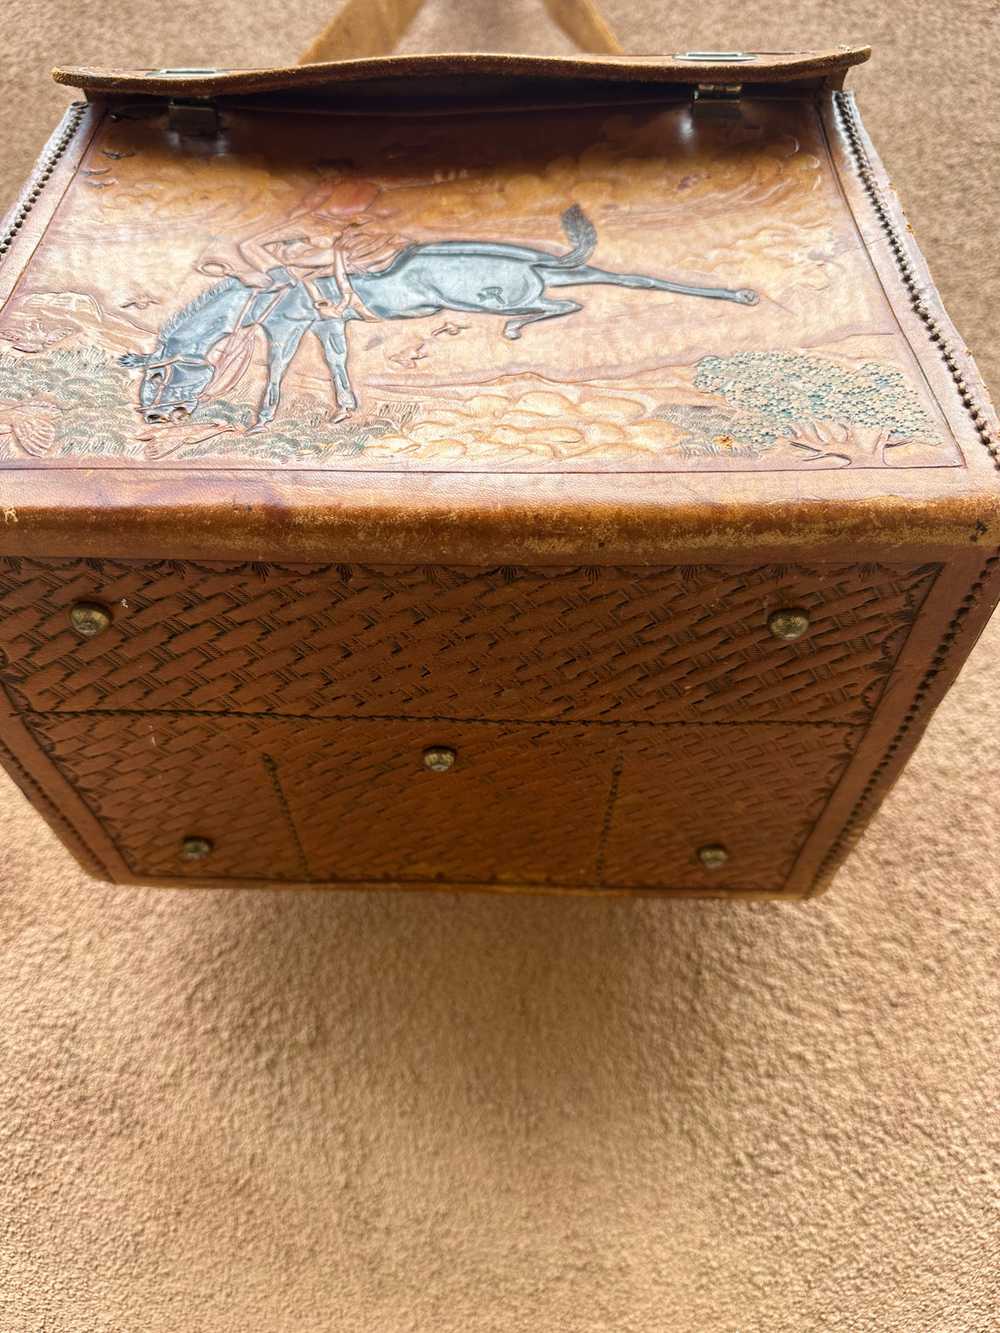 Hand Tooled Leather Cowboy Tack Box/Carry Case - image 3